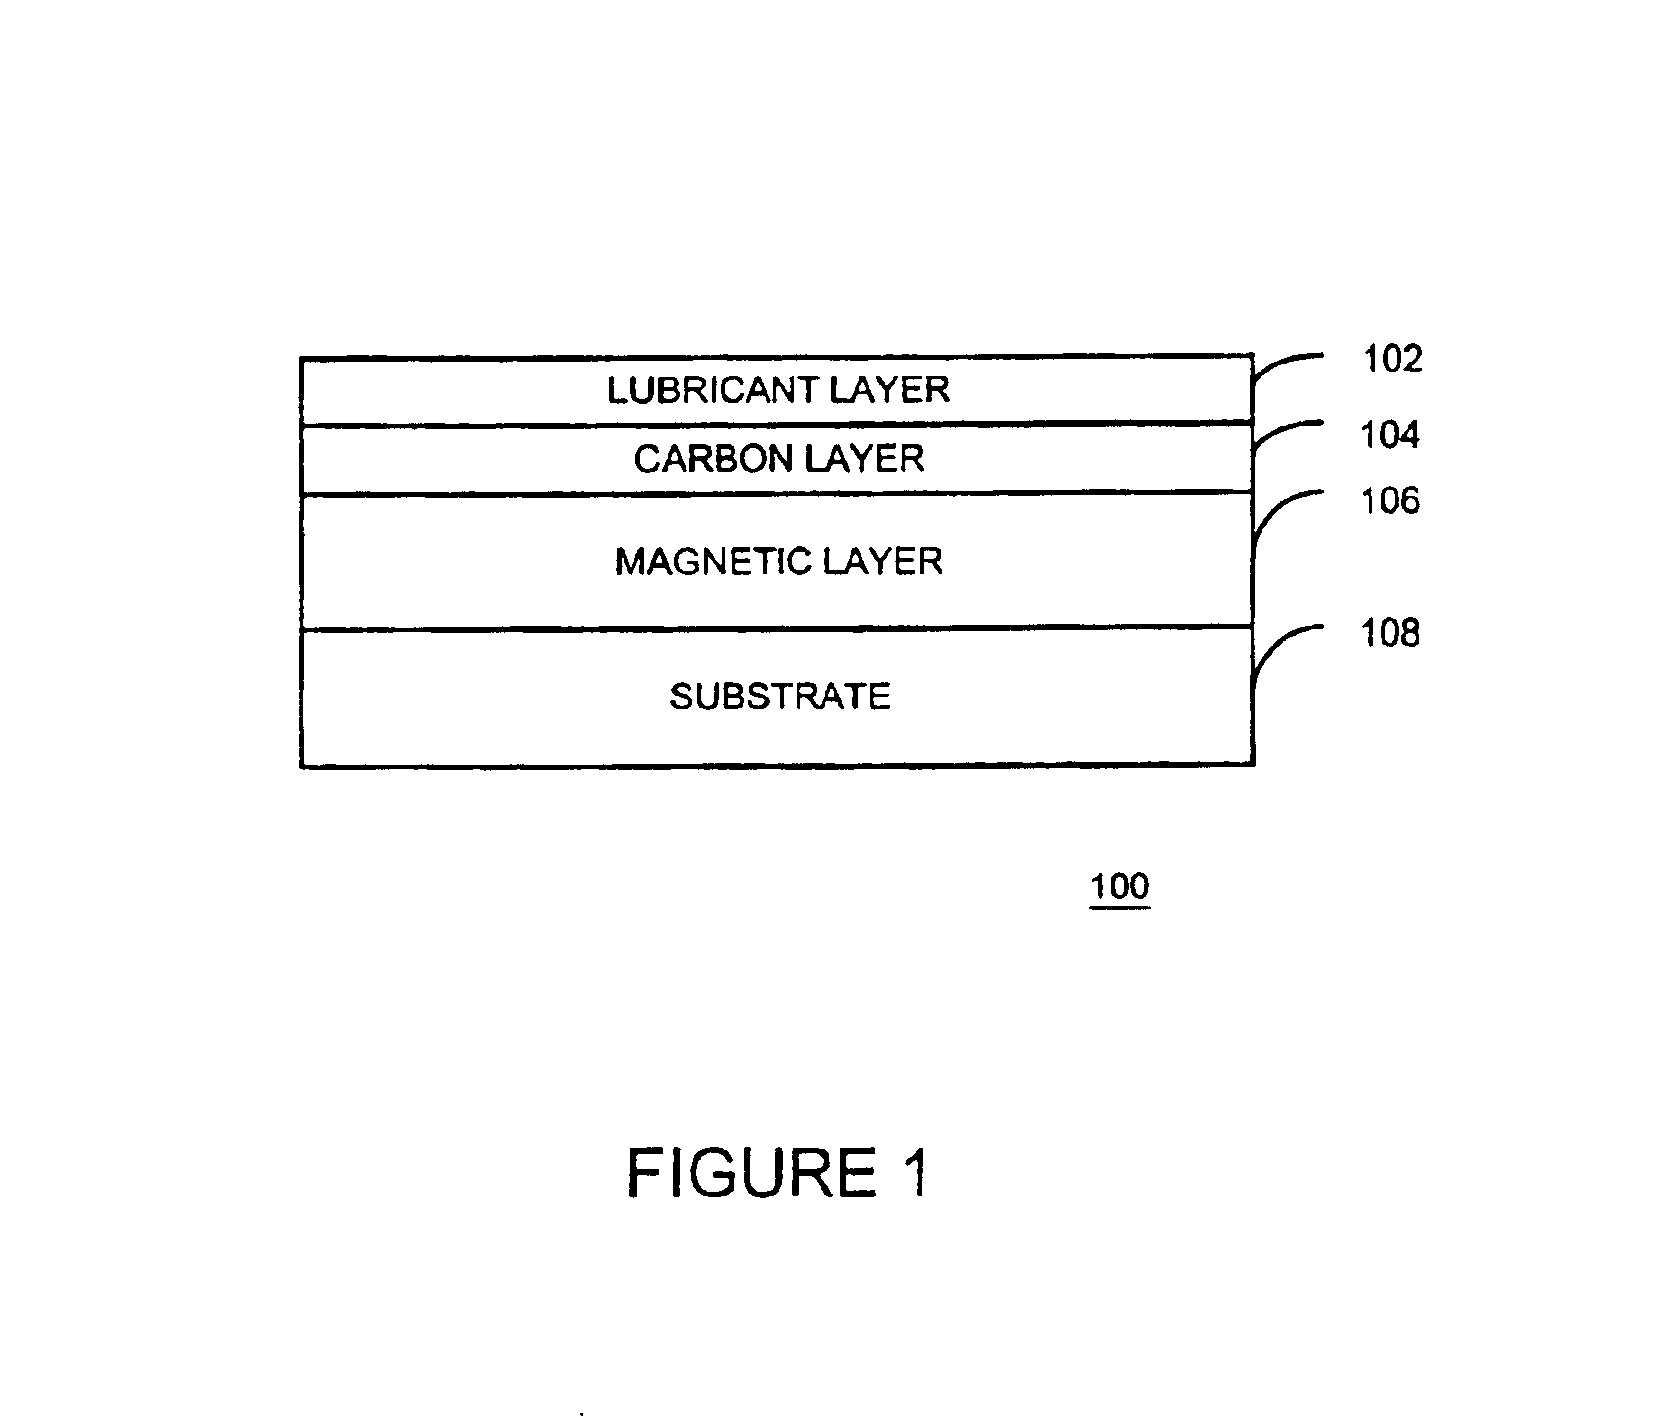 System and method for measuring properties of an object using a phase difference between two reflected light signals